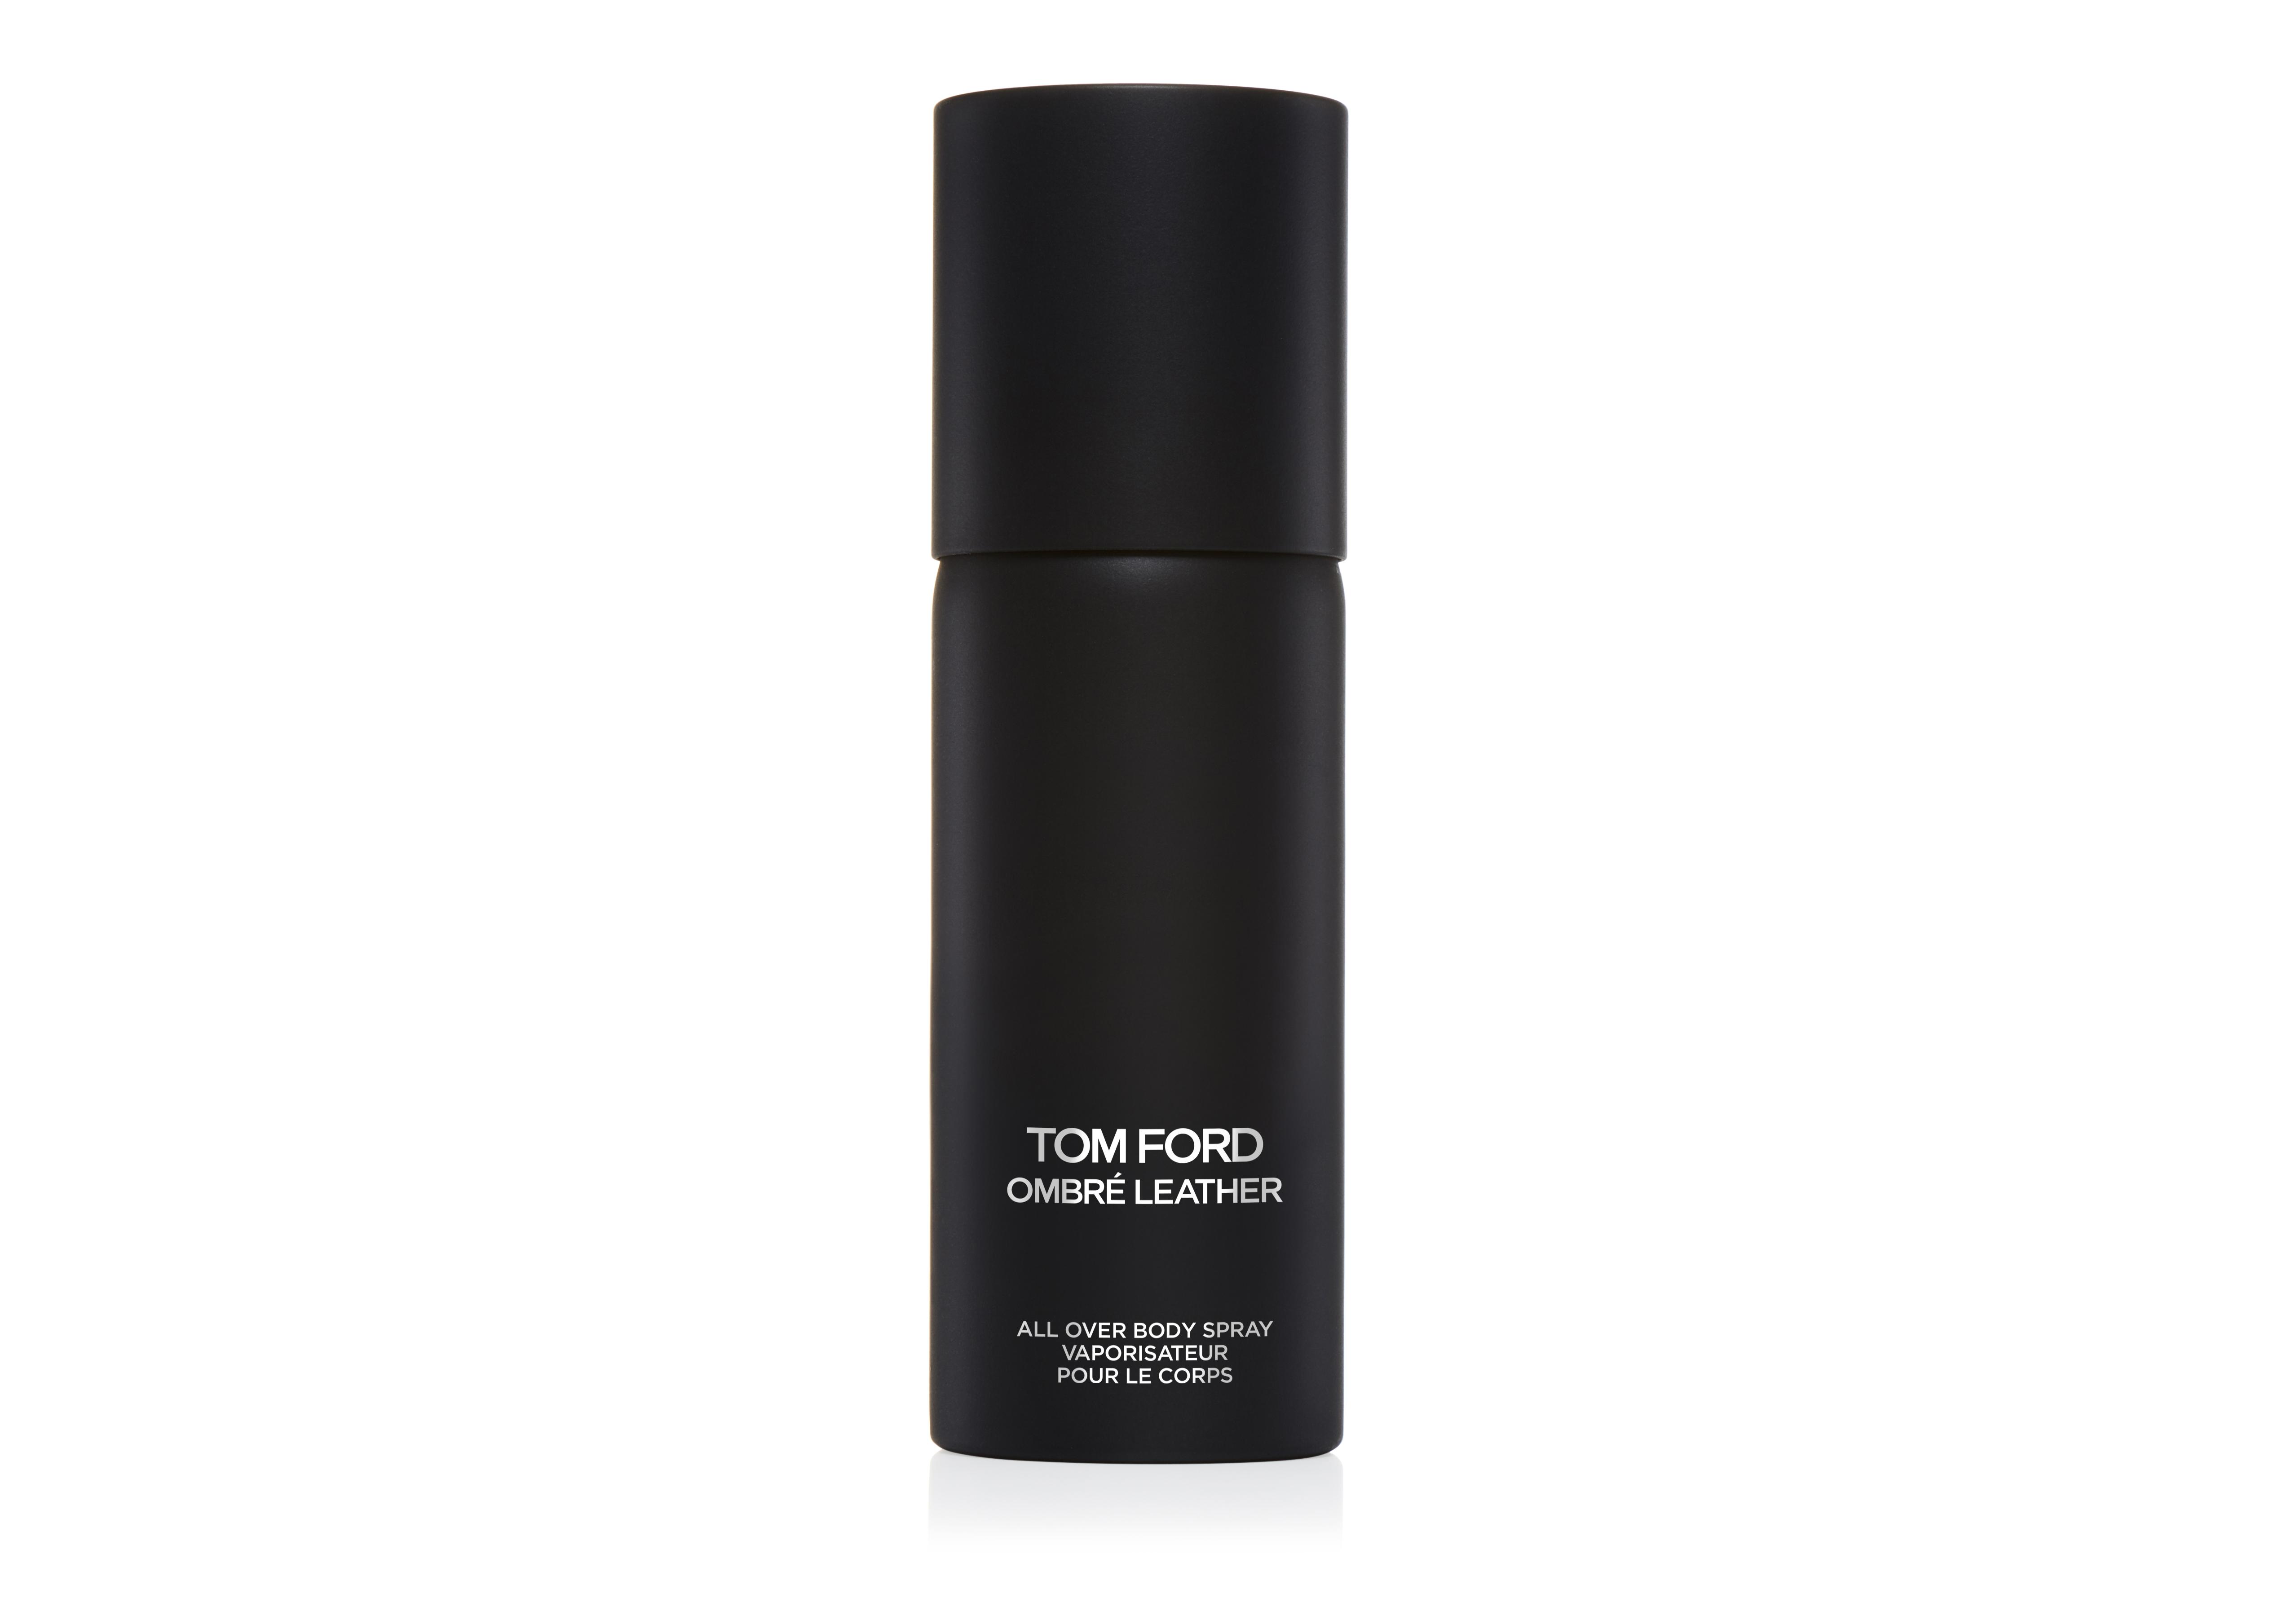 Actualizar 79+ imagen tom ford ombre leather body spray